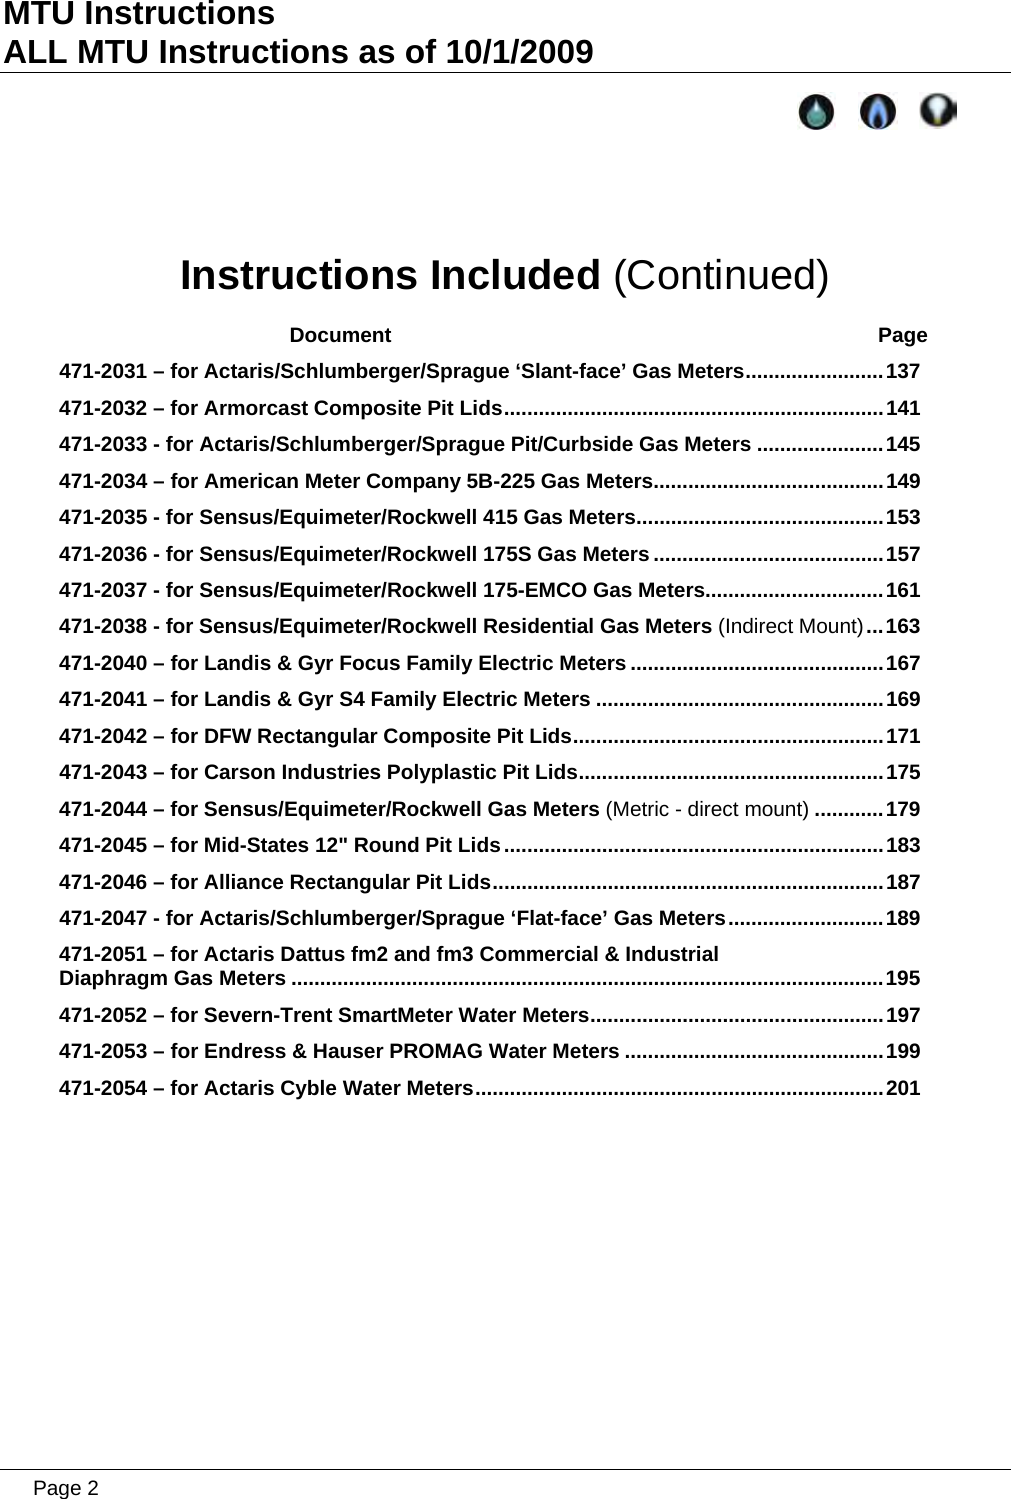 MTU Instructions ALL MTU Instructions as of 10/1/2009   Instructions Included (Continued)  Document  Page 471-2031 – for Actaris/Schlumberger/Sprague ‘Slant-face’ Gas Meters........................137 471-2032 – for Armorcast Composite Pit Lids..................................................................141 471-2033 - for Actaris/Schlumberger/Sprague Pit/Curbside Gas Meters ......................145 471-2034 – for American Meter Company 5B-225 Gas Meters........................................149 471-2035 - for Sensus/Equimeter/Rockwell 415 Gas Meters...........................................153 471-2036 - for Sensus/Equimeter/Rockwell 175S Gas Meters ........................................157 471-2037 - for Sensus/Equimeter/Rockwell 175-EMCO Gas Meters...............................161 471-2038 - for Sensus/Equimeter/Rockwell Residential Gas Meters (Indirect Mount)...163 471-2040 – for Landis &amp; Gyr Focus Family Electric Meters ............................................167 471-2041 – for Landis &amp; Gyr S4 Family Electric Meters ..................................................169 471-2042 – for DFW Rectangular Composite Pit Lids......................................................171 471-2043 – for Carson Industries Polyplastic Pit Lids.....................................................175 471-2044 – for Sensus/Equimeter/Rockwell Gas Meters (Metric - direct mount) ............179 471-2045 – for Mid-States 12&quot; Round Pit Lids..................................................................183 471-2046 – for Alliance Rectangular Pit Lids....................................................................187 471-2047 - for Actaris/Schlumberger/Sprague ‘Flat-face’ Gas Meters...........................189 471-2051 – for Actaris Dattus fm2 and fm3 Commercial &amp; Industrial  Diaphragm Gas Meters .......................................................................................................195 471-2052 – for Severn-Trent SmartMeter Water Meters...................................................197 471-2053 – for Endress &amp; Hauser PROMAG Water Meters .............................................199 471-2054 – for Actaris Cyble Water Meters.......................................................................201   Page 2